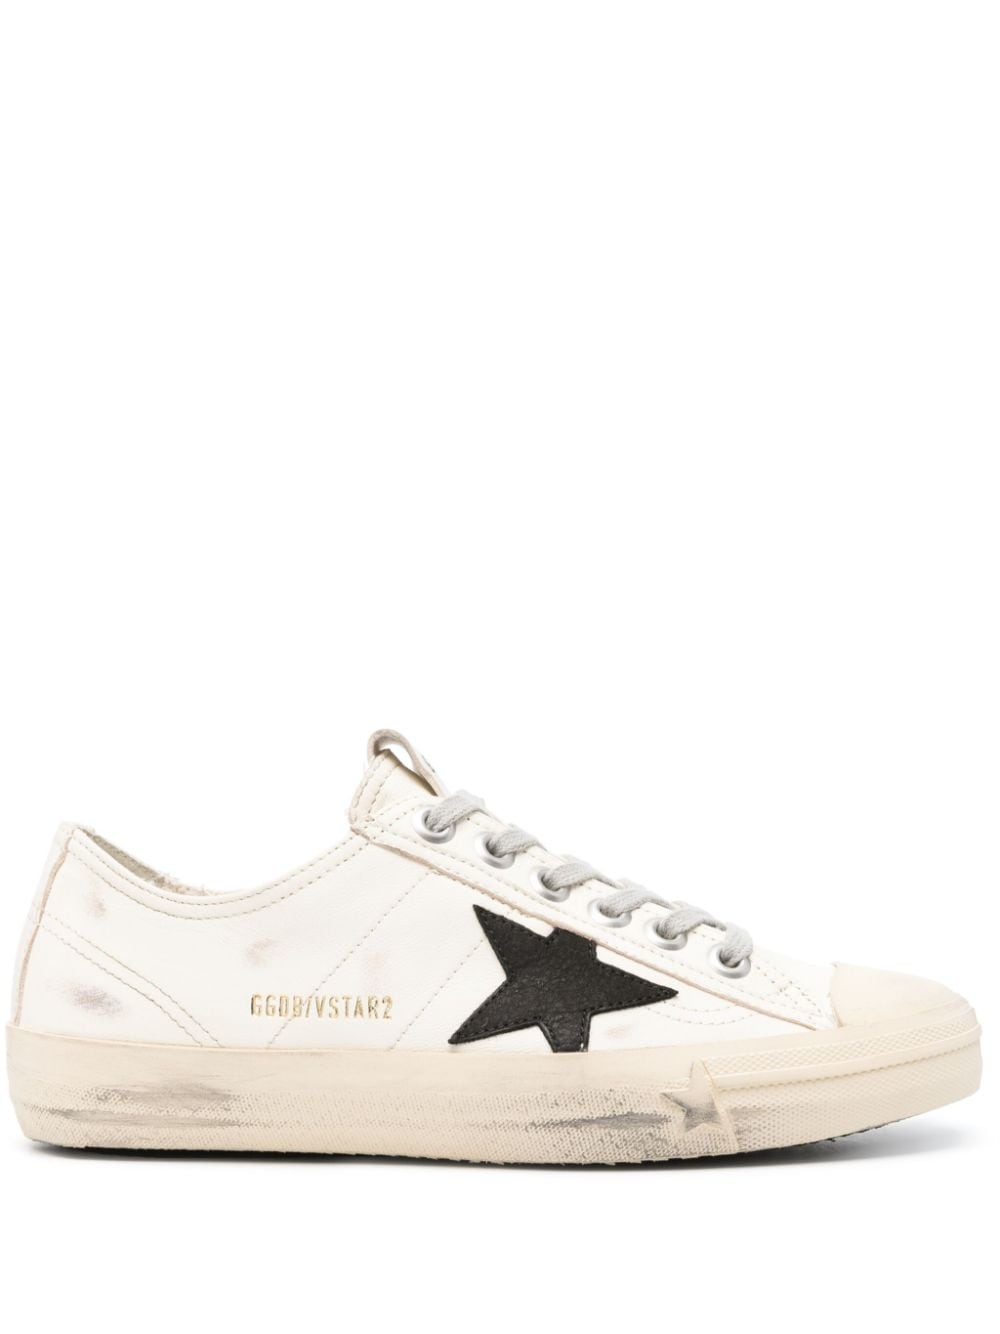 V-Star leather sneakers - 1